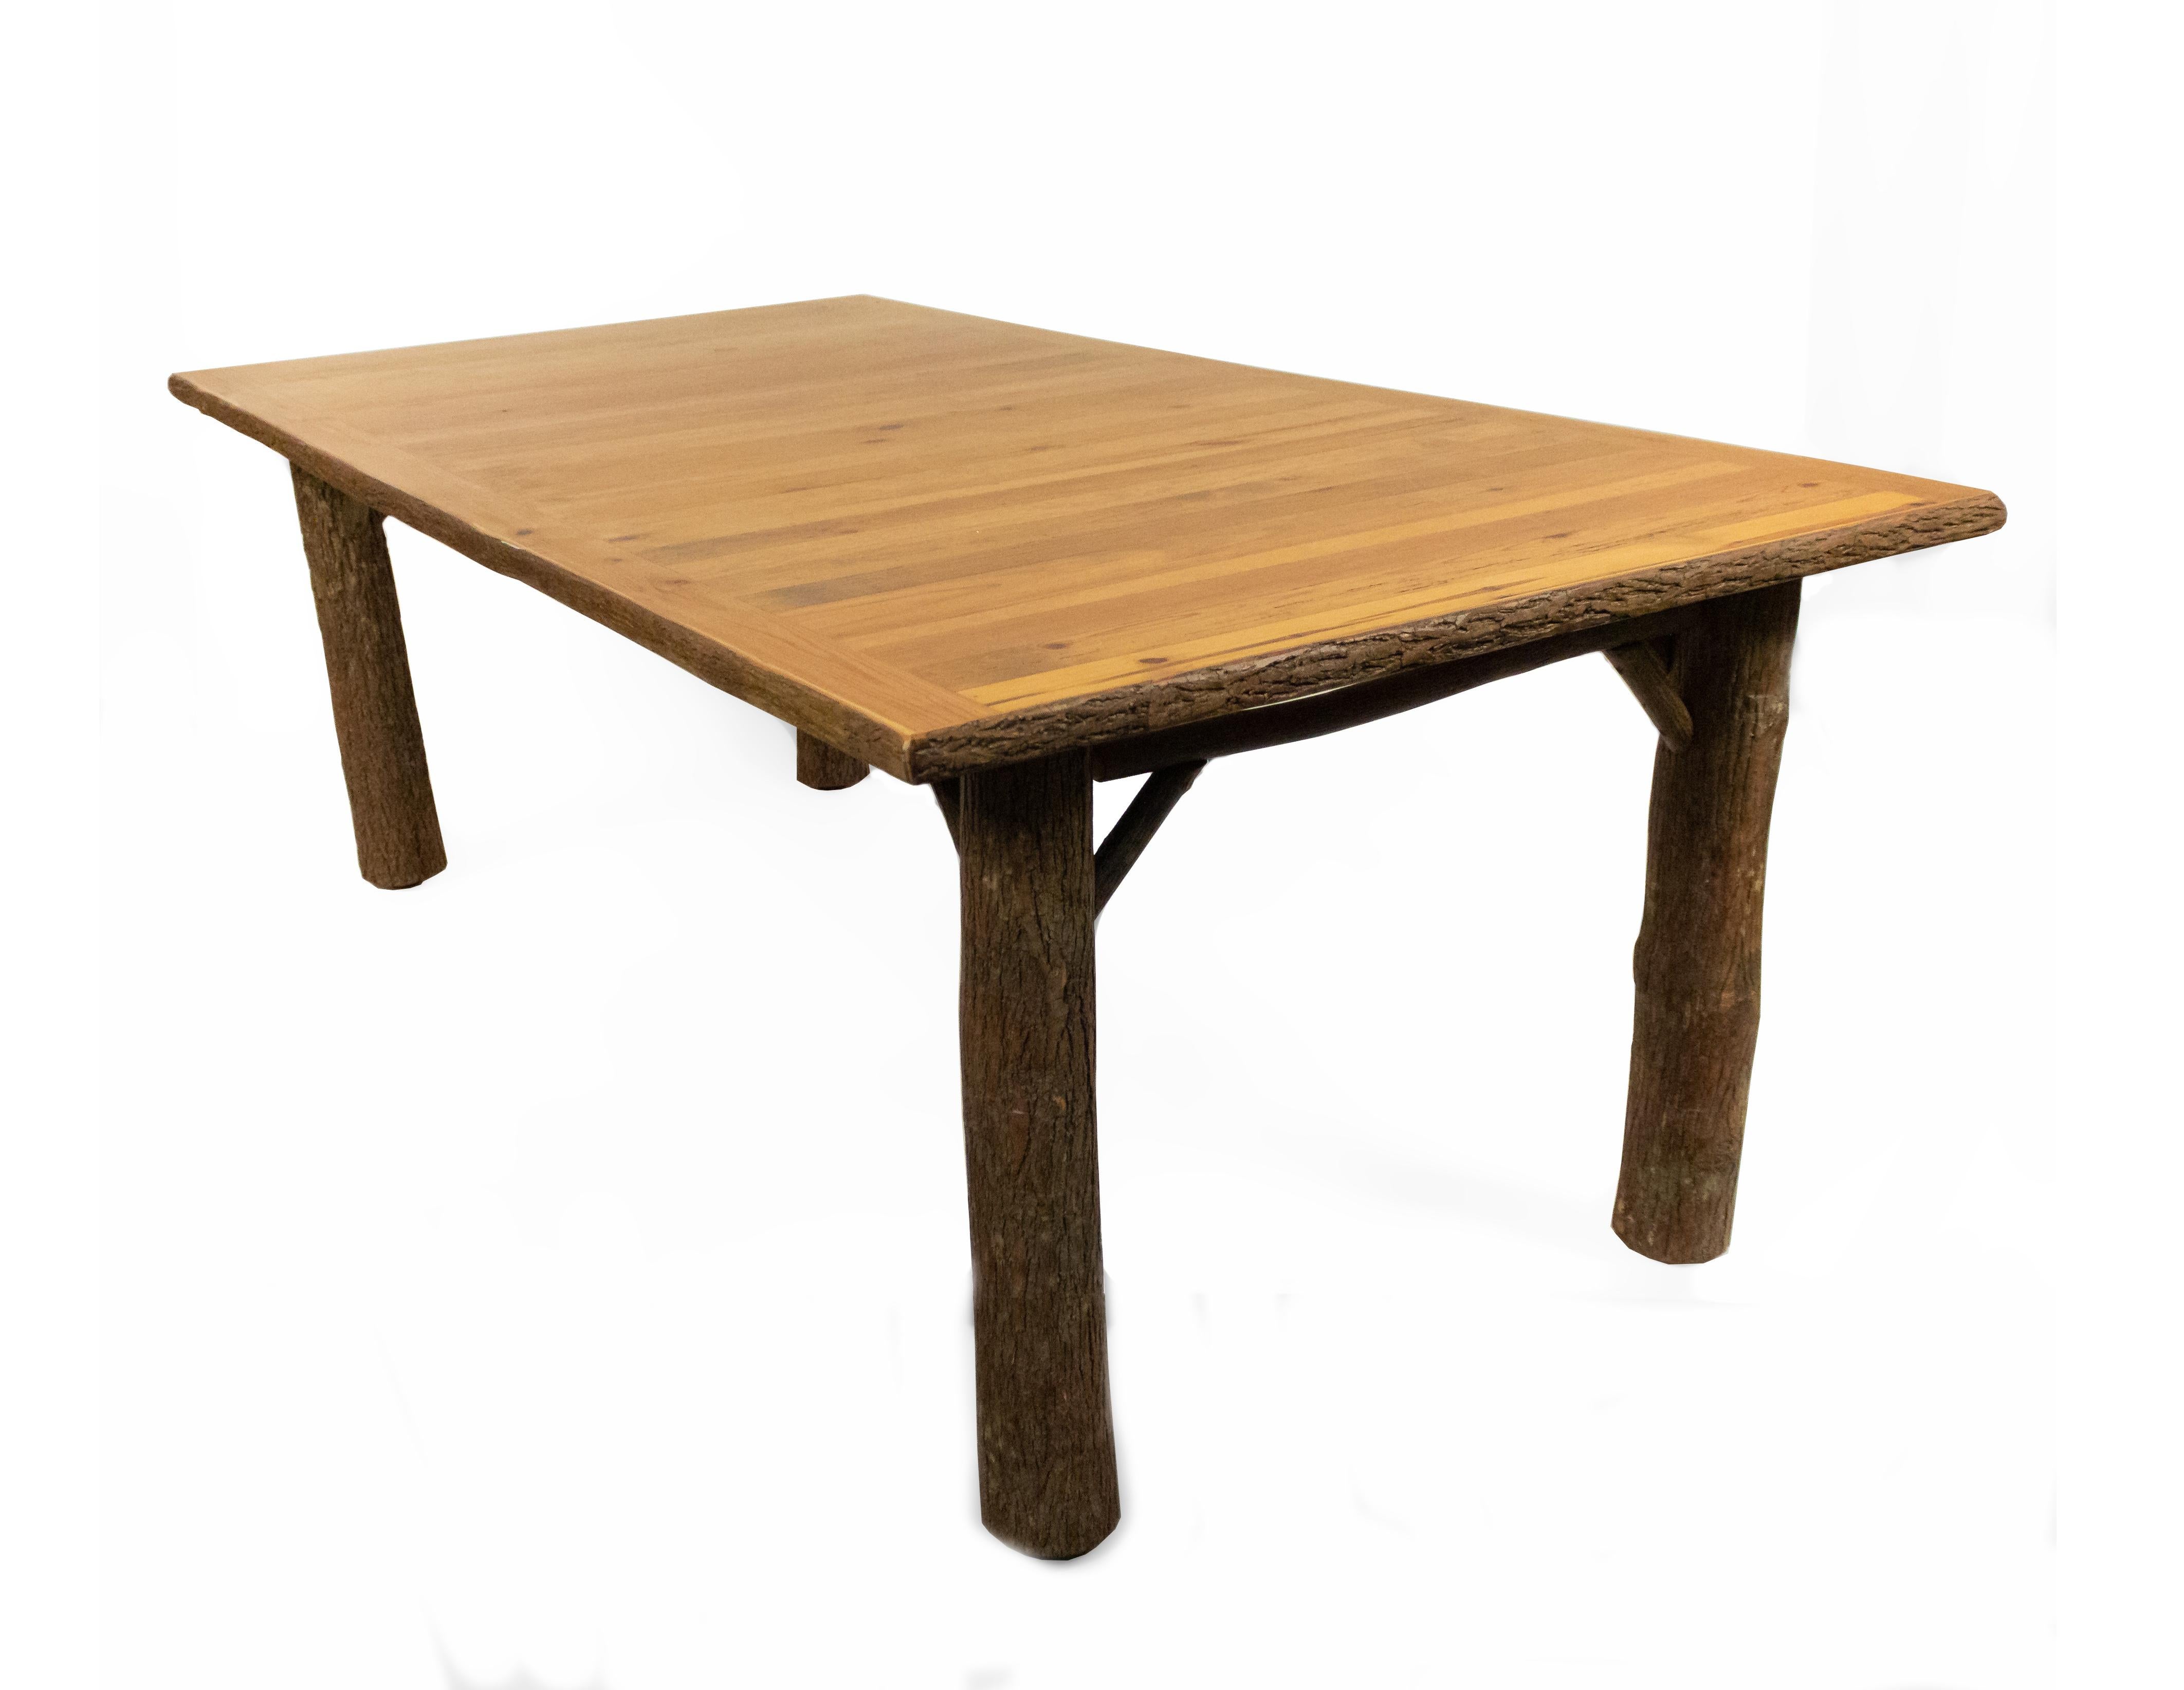 Late 20th century rustic old hickory large rectangular dining table with exposed bark legs and pine plank top (brass tag).